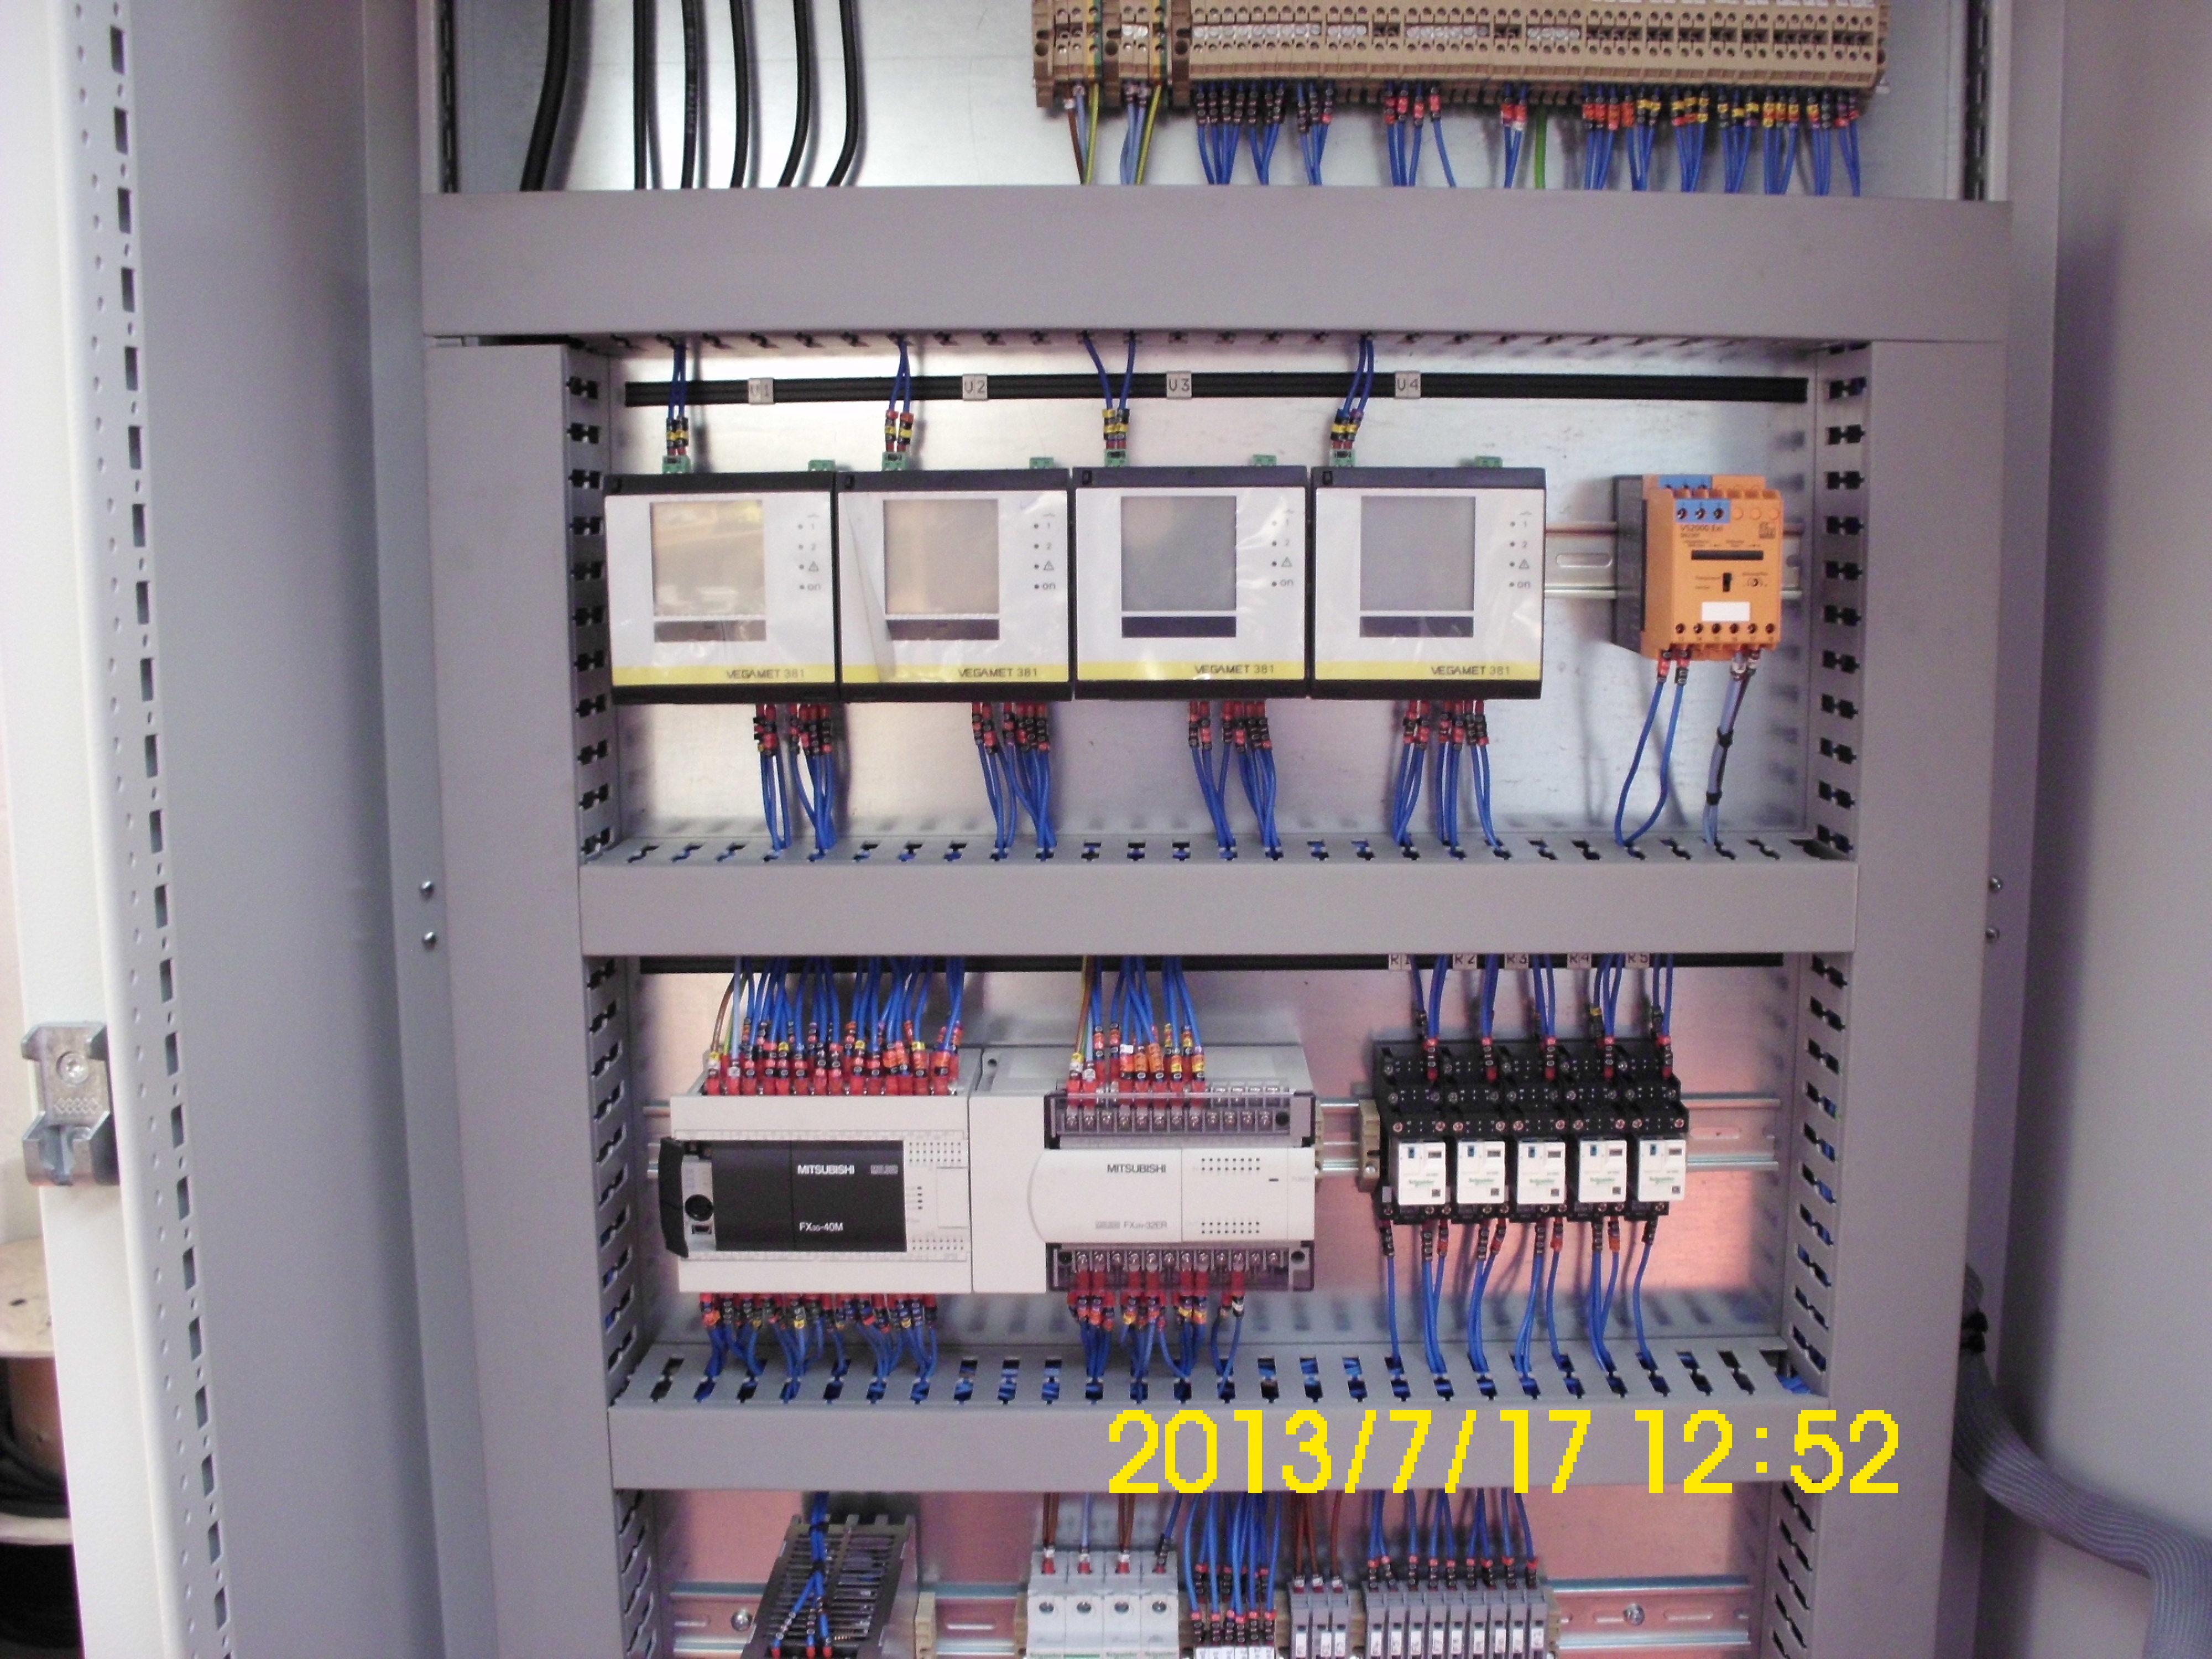 Industrial Control Systems PLC #12